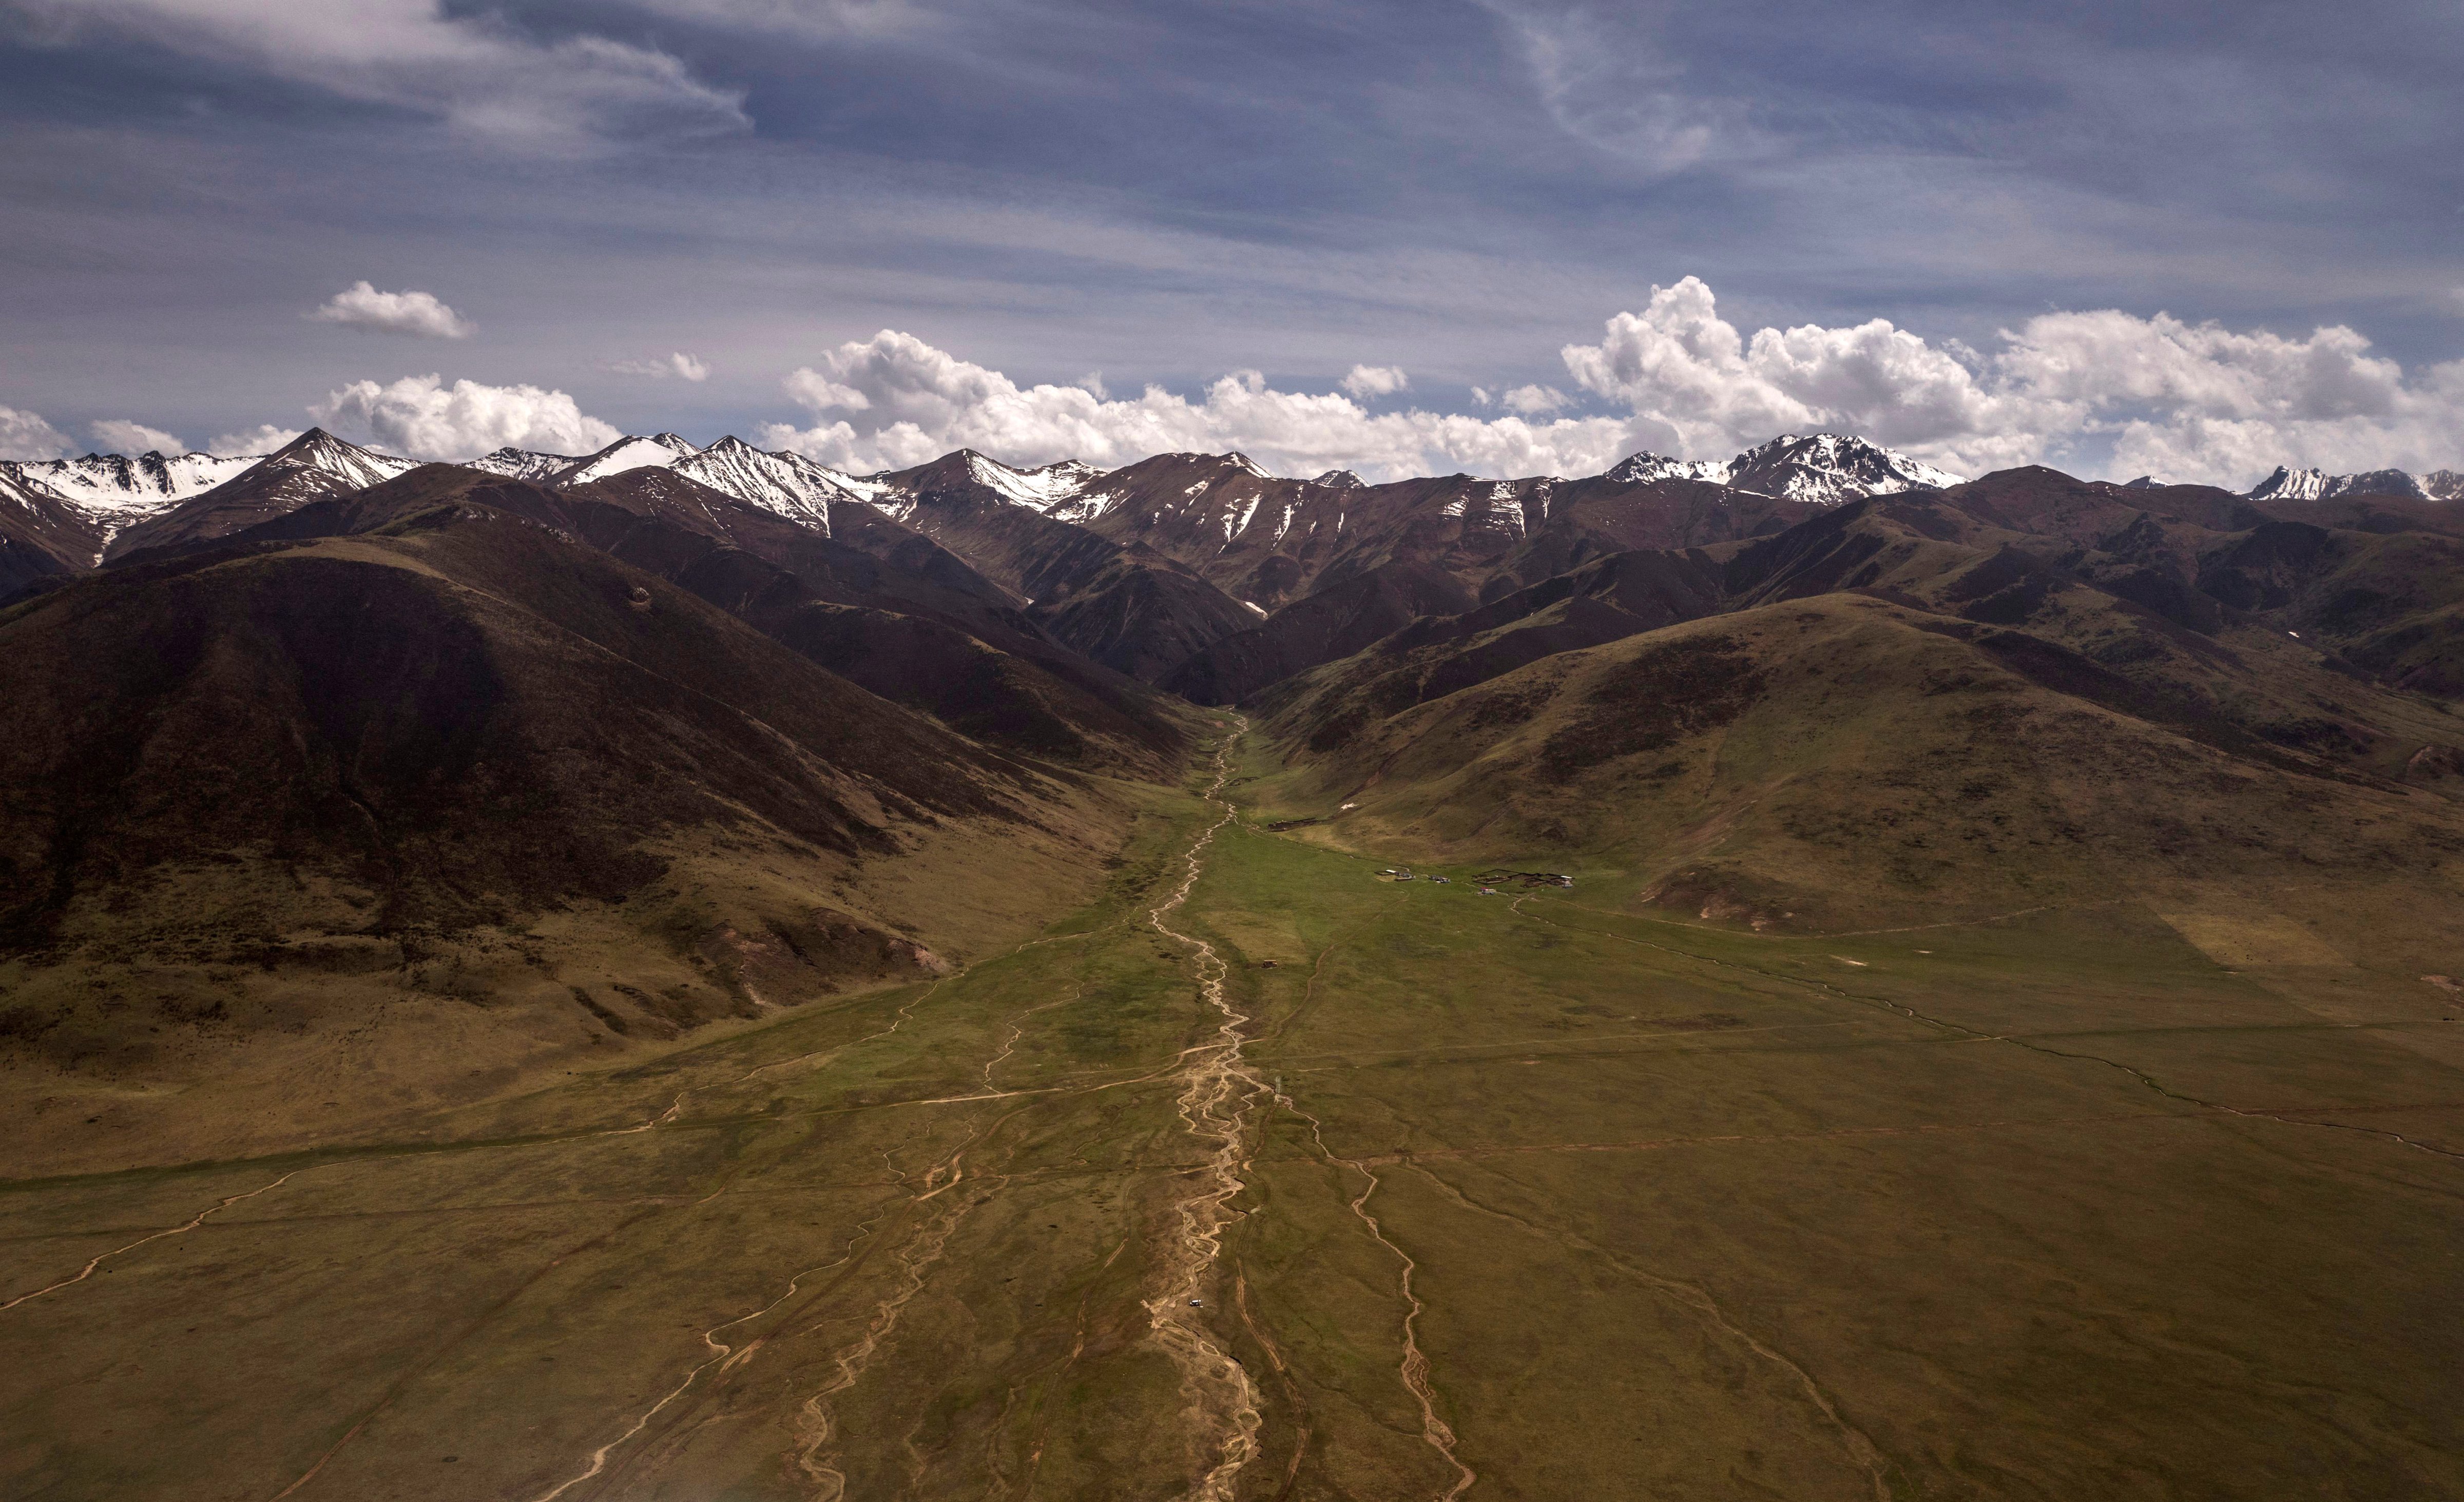 Search For Prized Fungus A Way Of Life On Tibetan Plateau